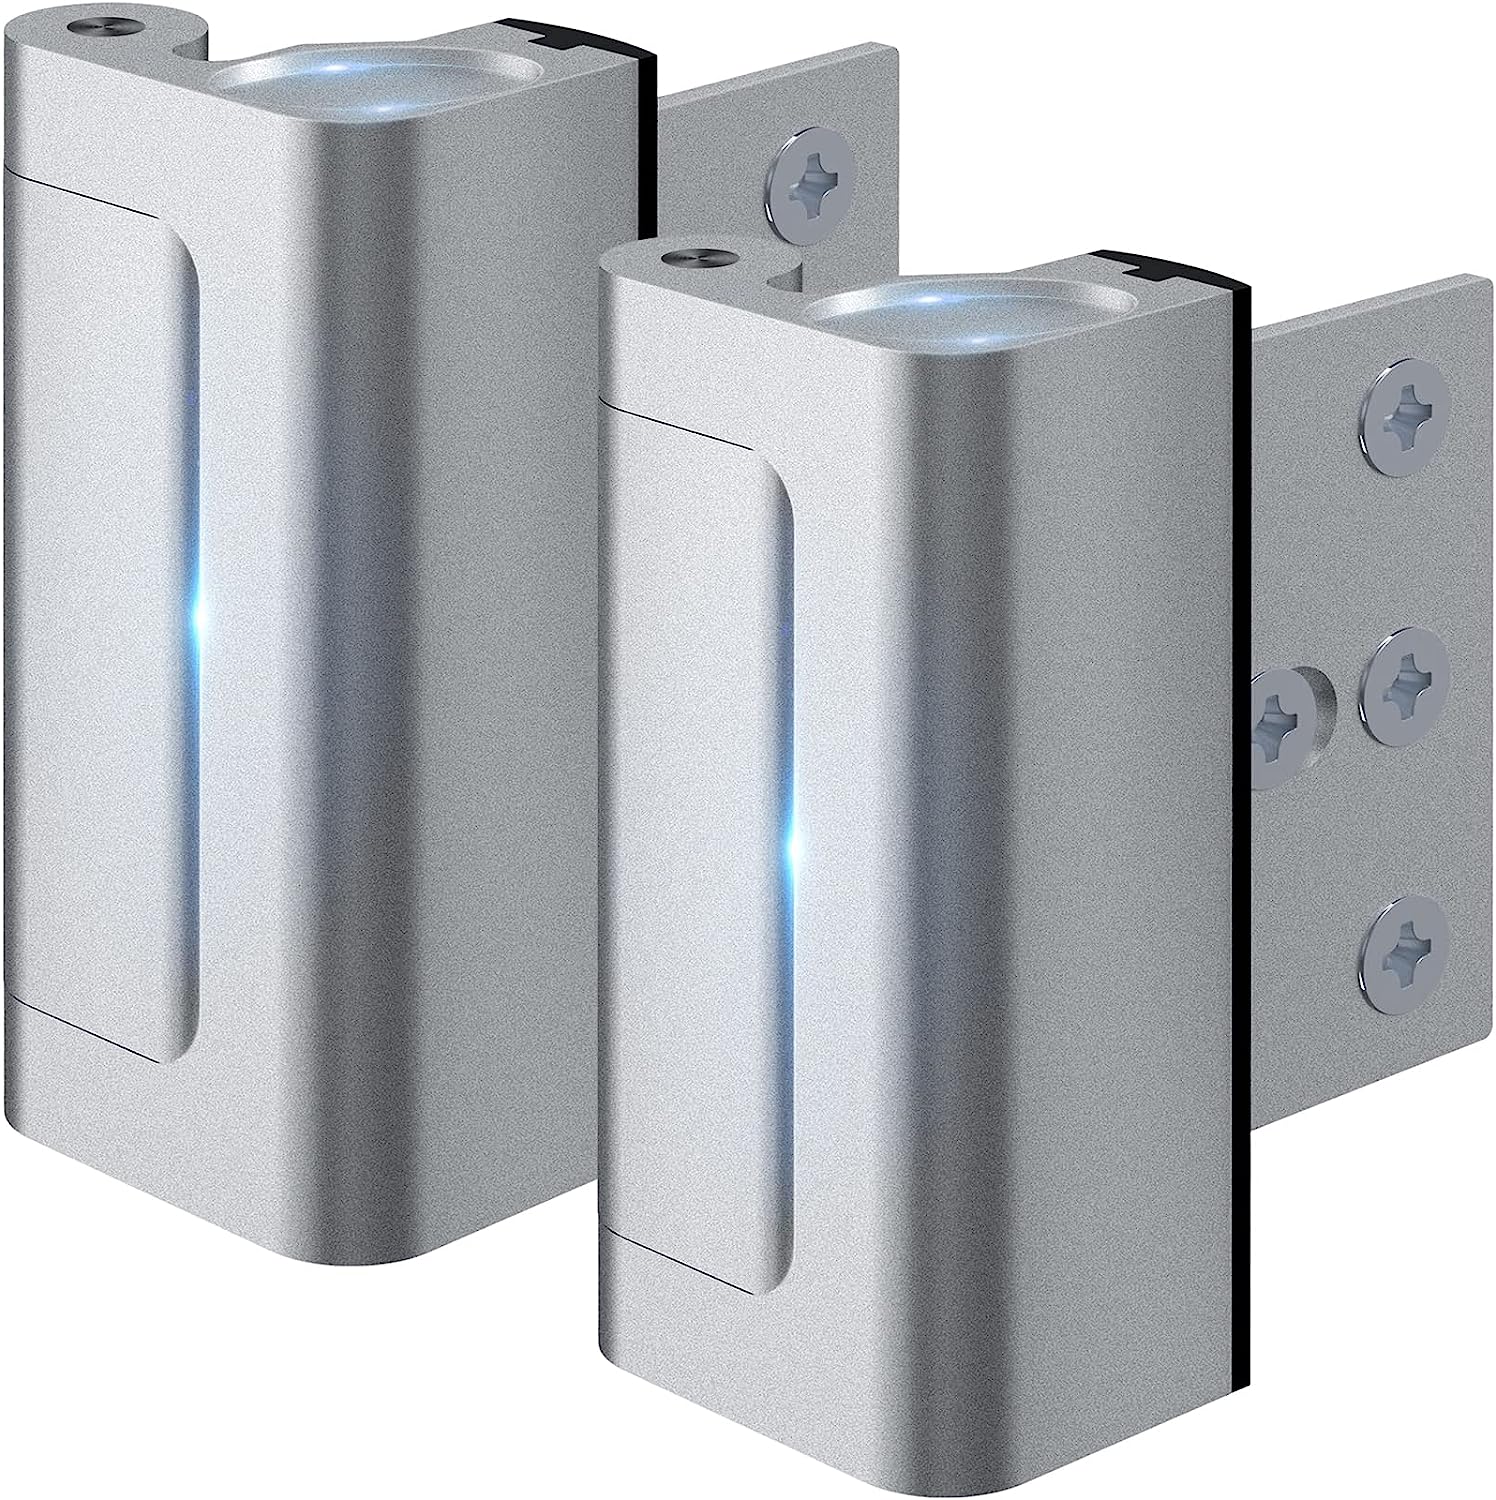 2 Pack Home Security Door Lock Withstand 800 lbs for [...]